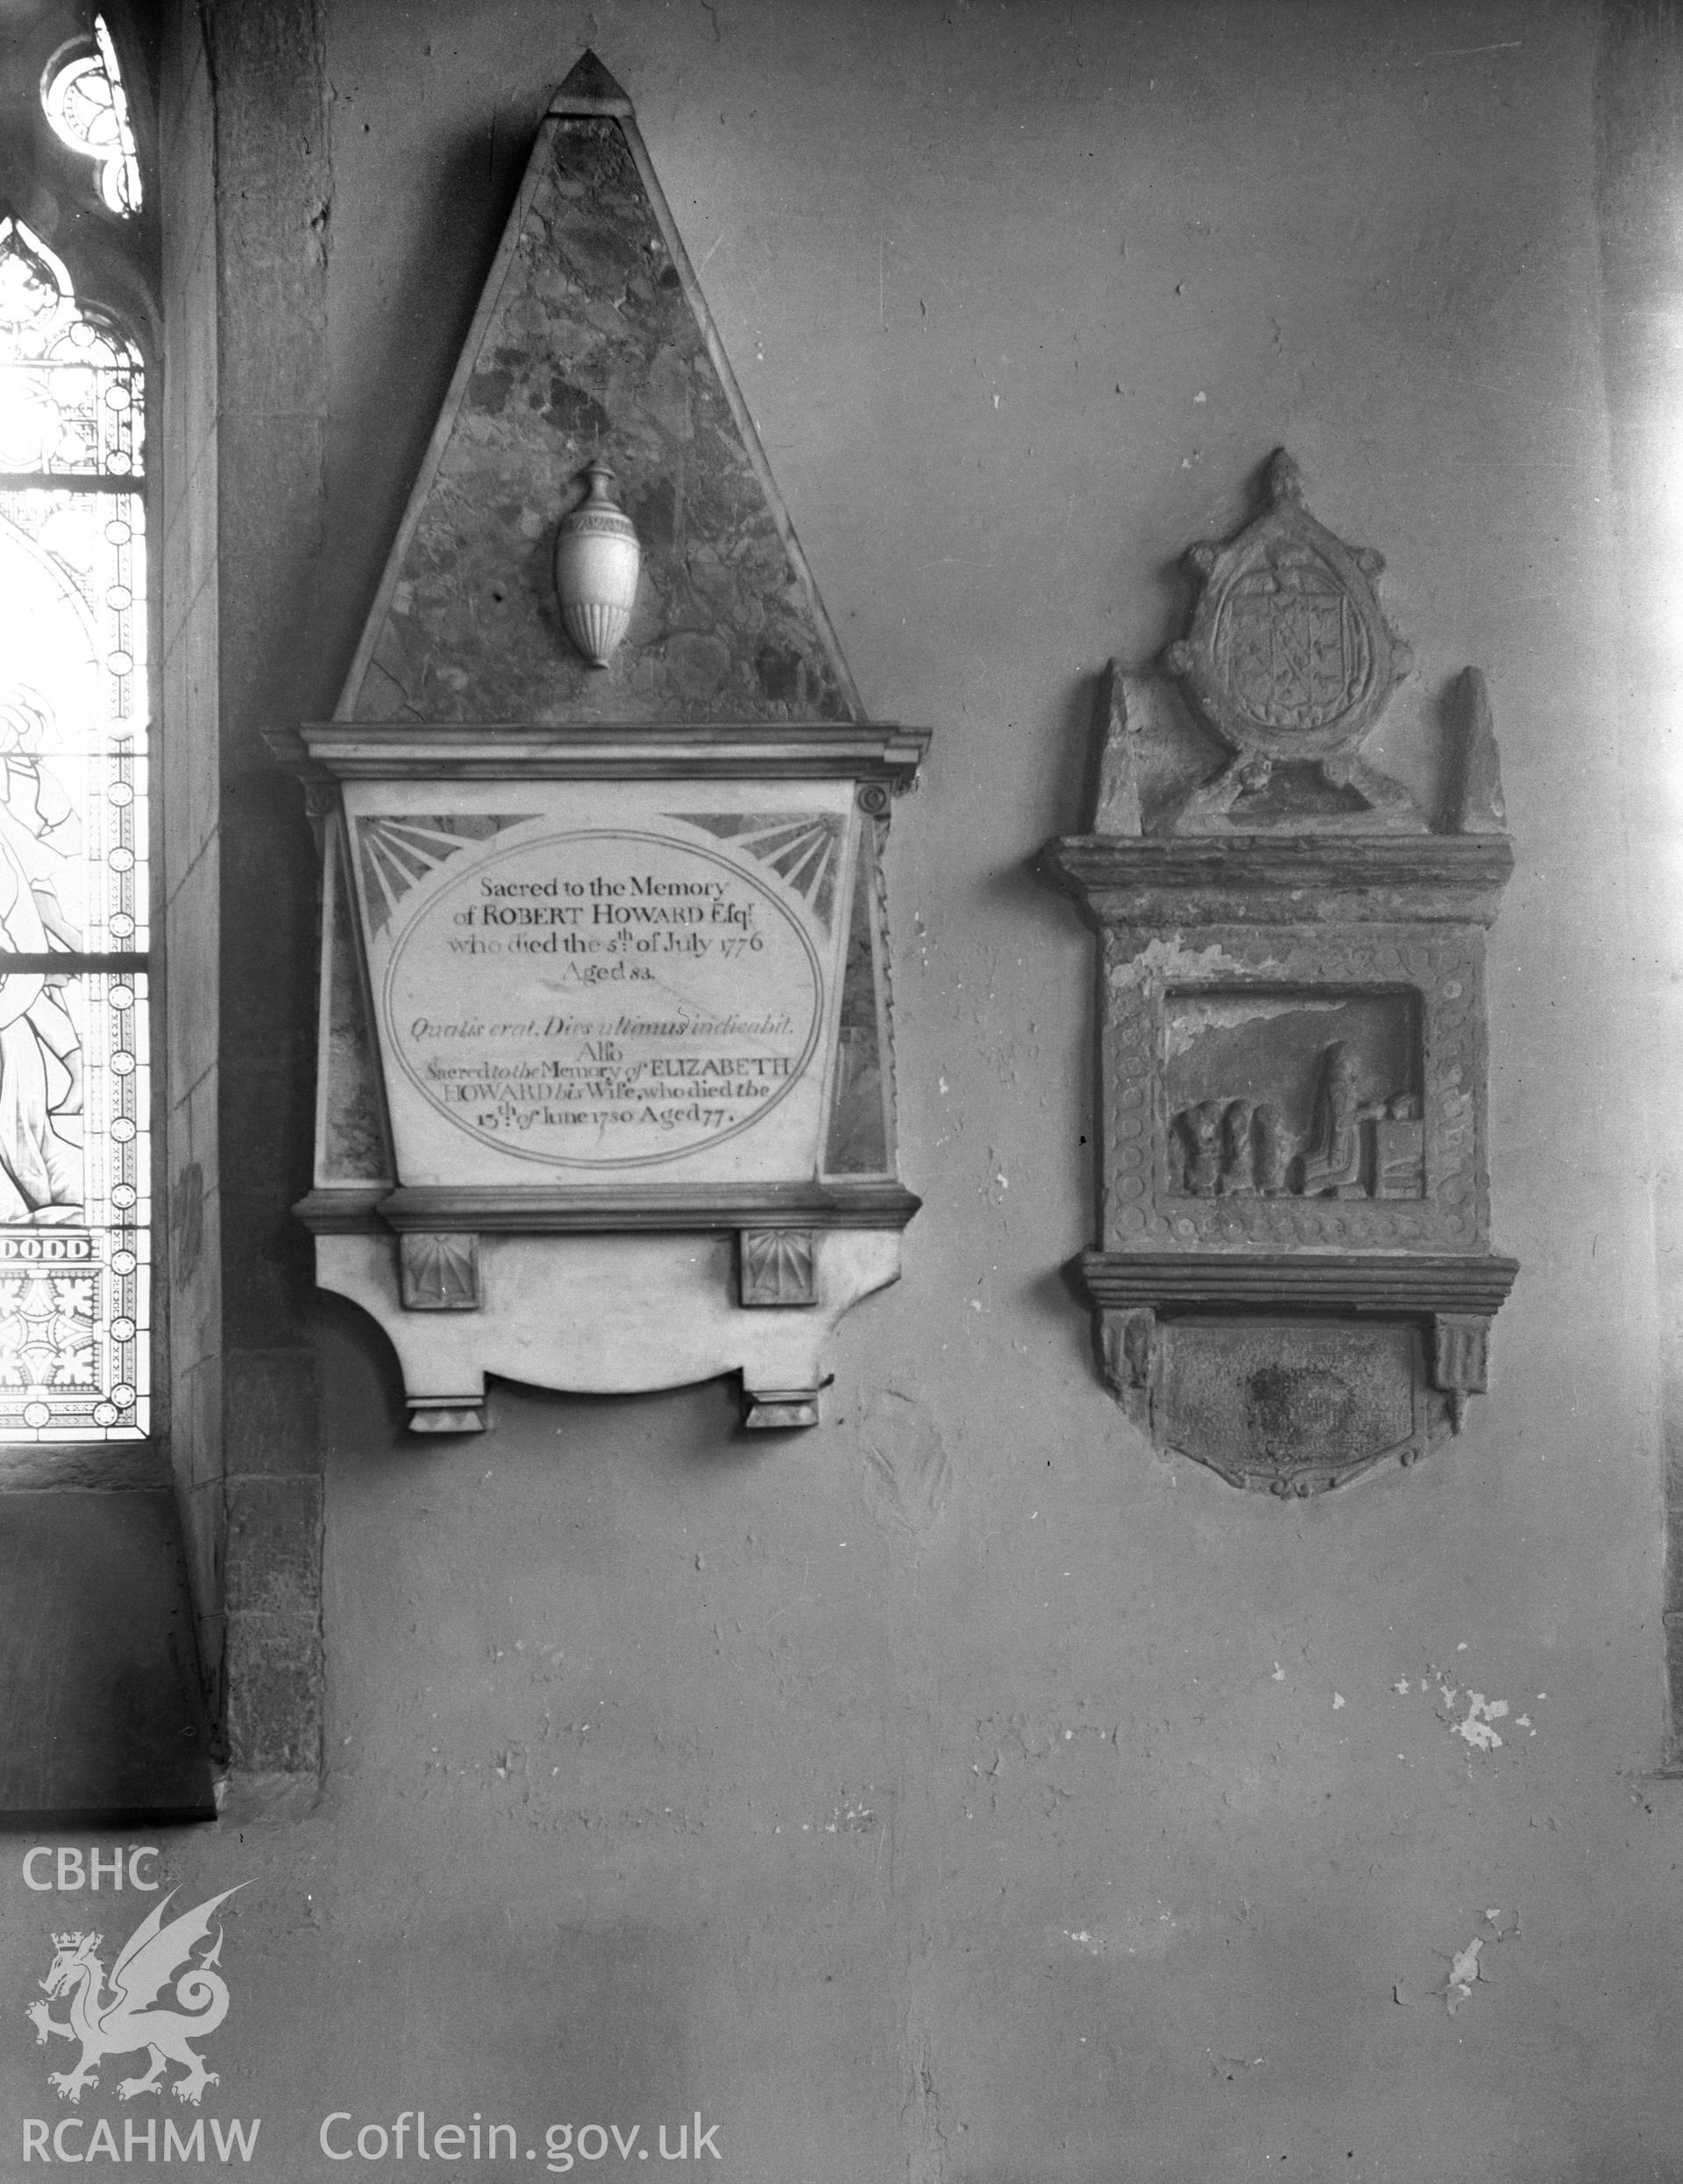 Interior view of St Marys Church Conwy showing two memorials on the wall, taken in 10.09.1951.